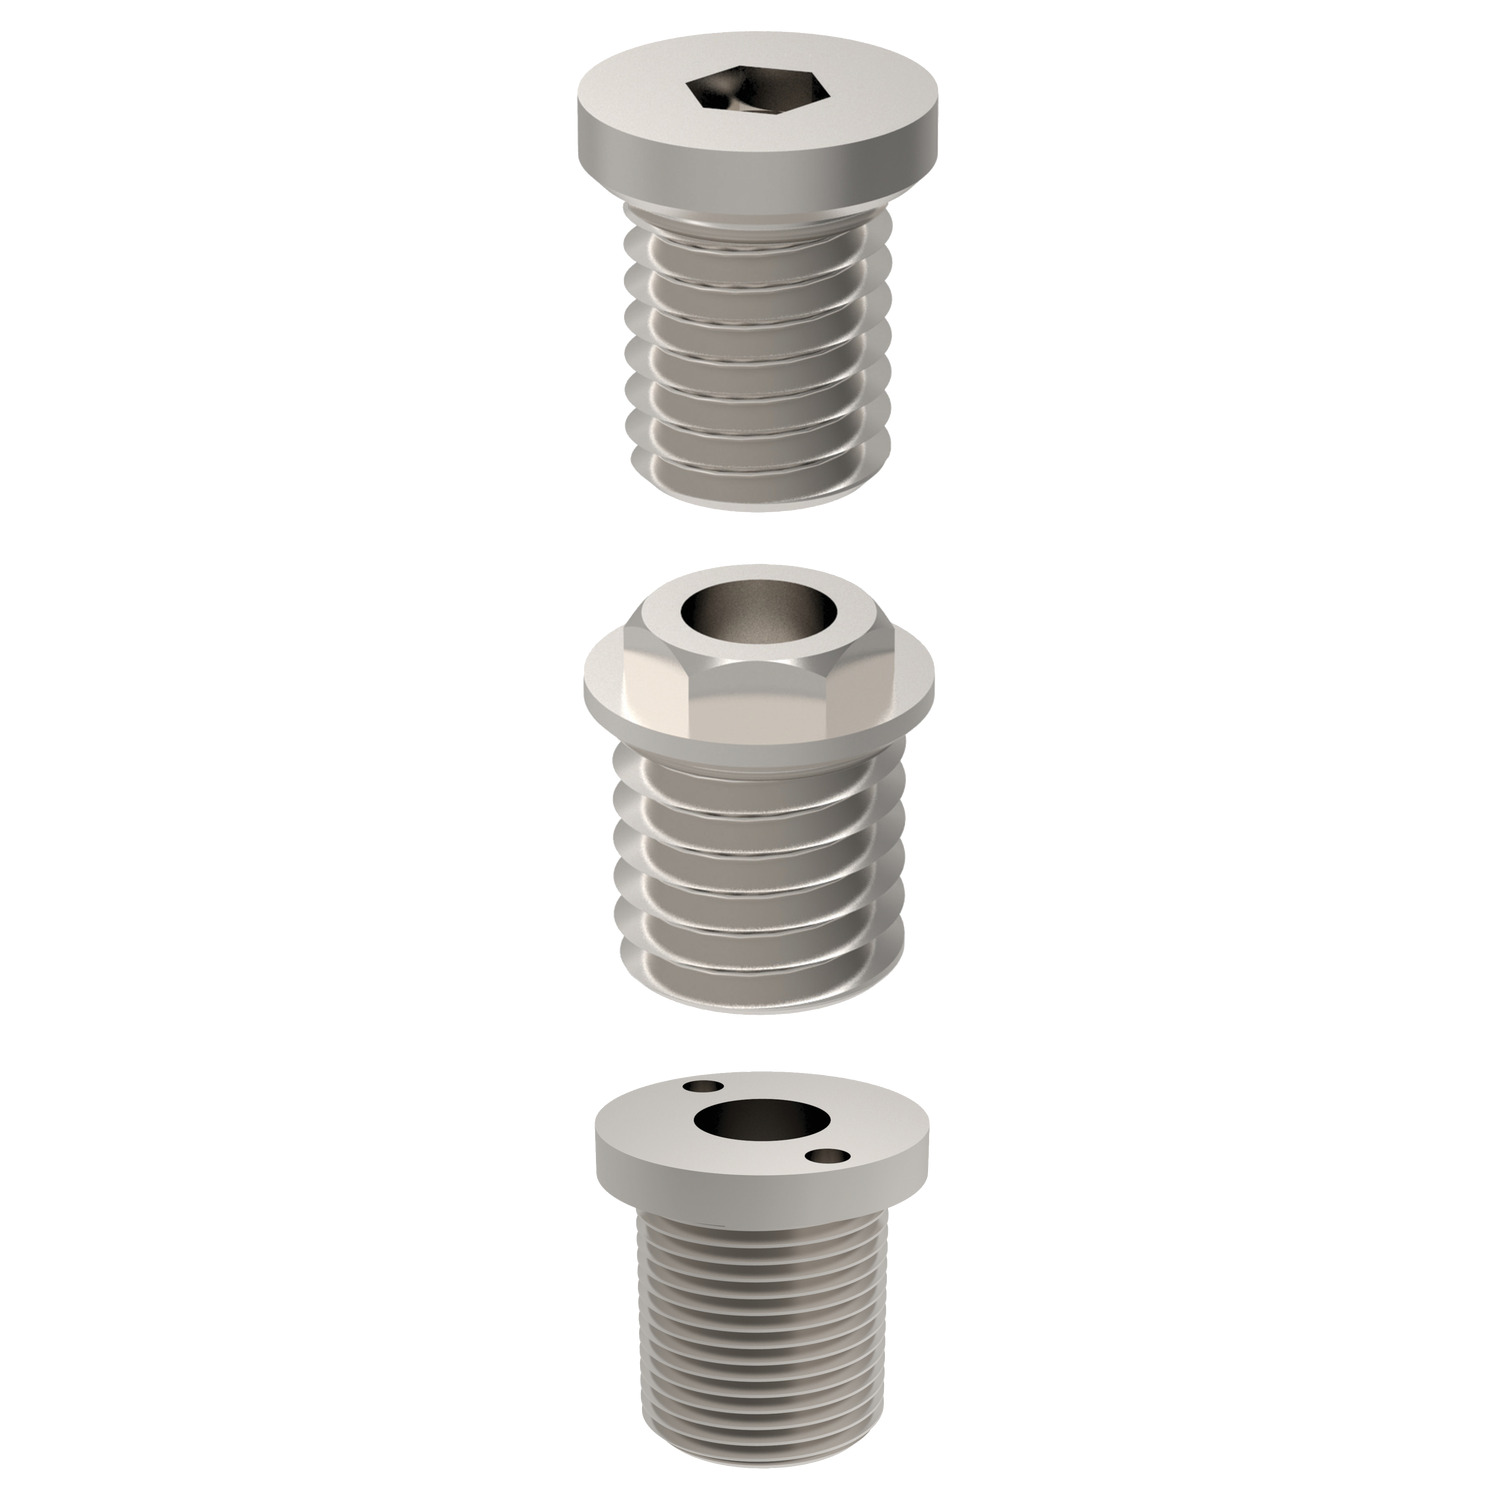 Product 33248, Locating Bushes for ball lock pins / 